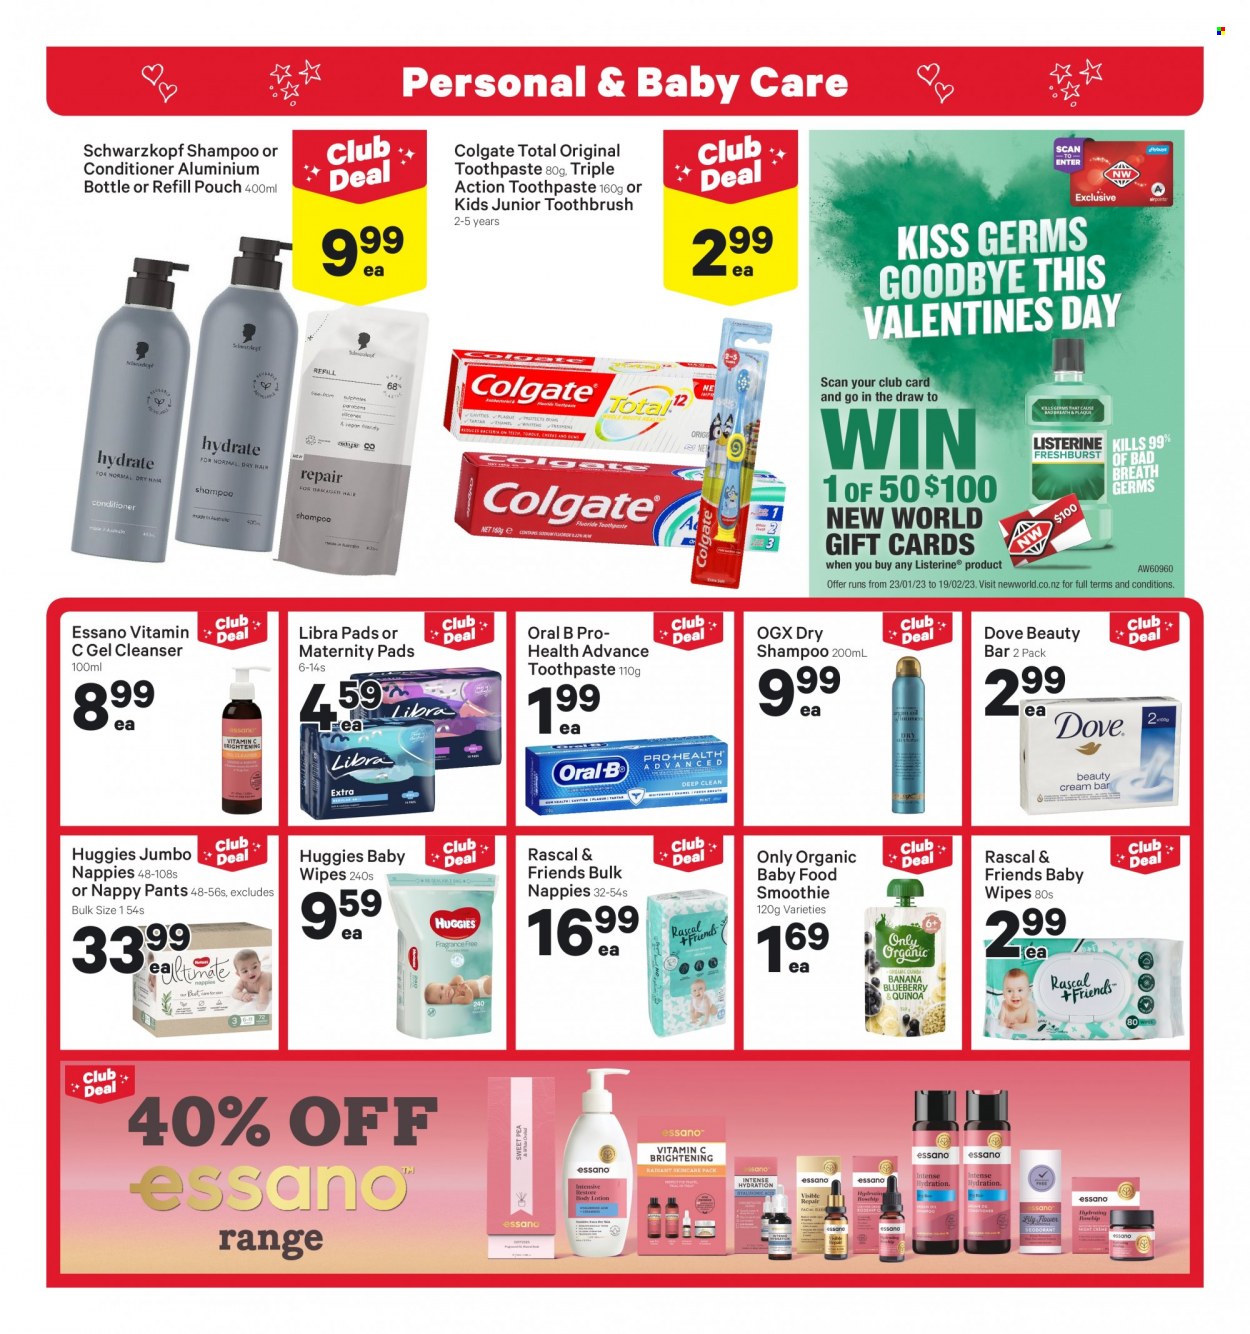 thumbnail - New World mailer - 06.02.2023 - 12.02.2023 - Sales products - Dove, smoothie, organic baby food, wipes, Huggies, pants, baby wipes, nappies, shampoo, Schwarzkopf, Colgate, Listerine, toothbrush, Oral-B, toothpaste, cleanser, OGX, conditioner, Essano, vitamin c. Page 17.